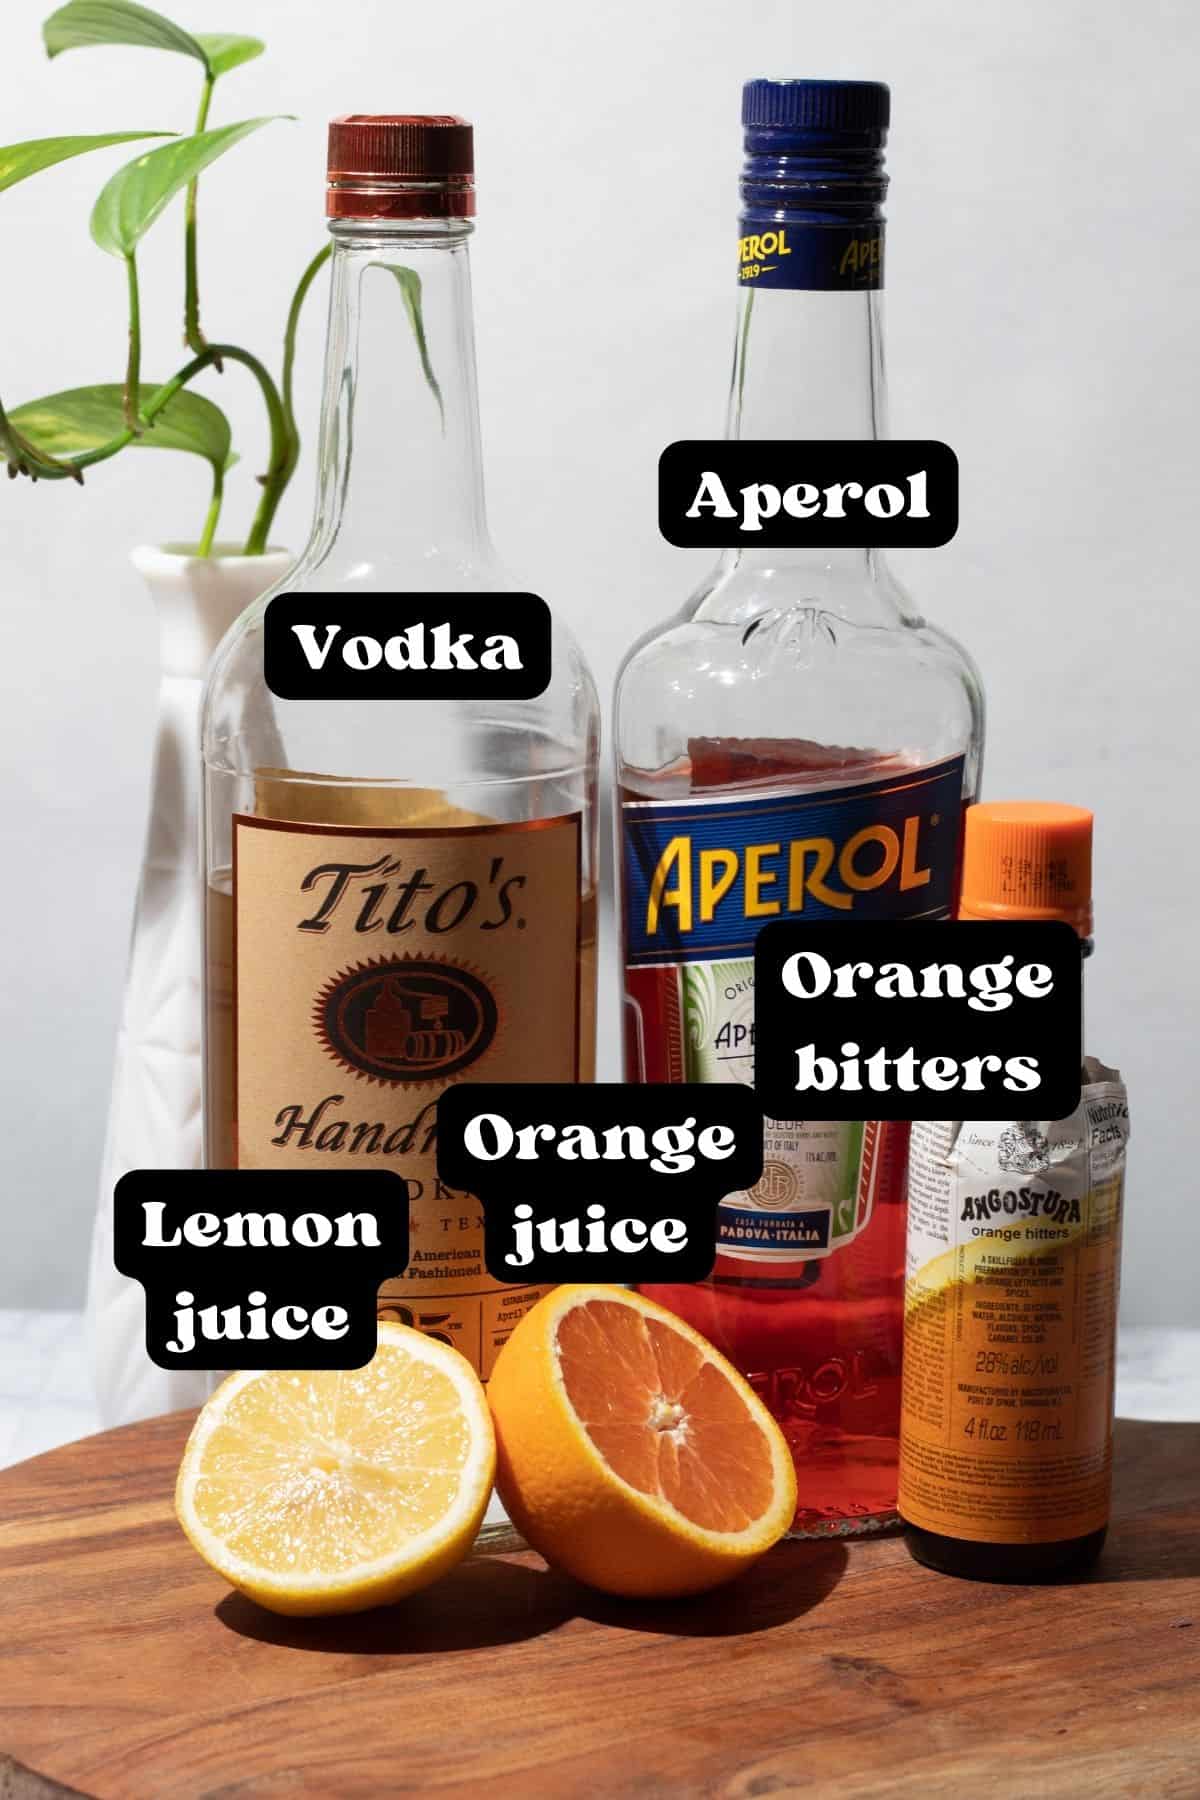 Ingredients for the cocktail spread out on a wood surface.